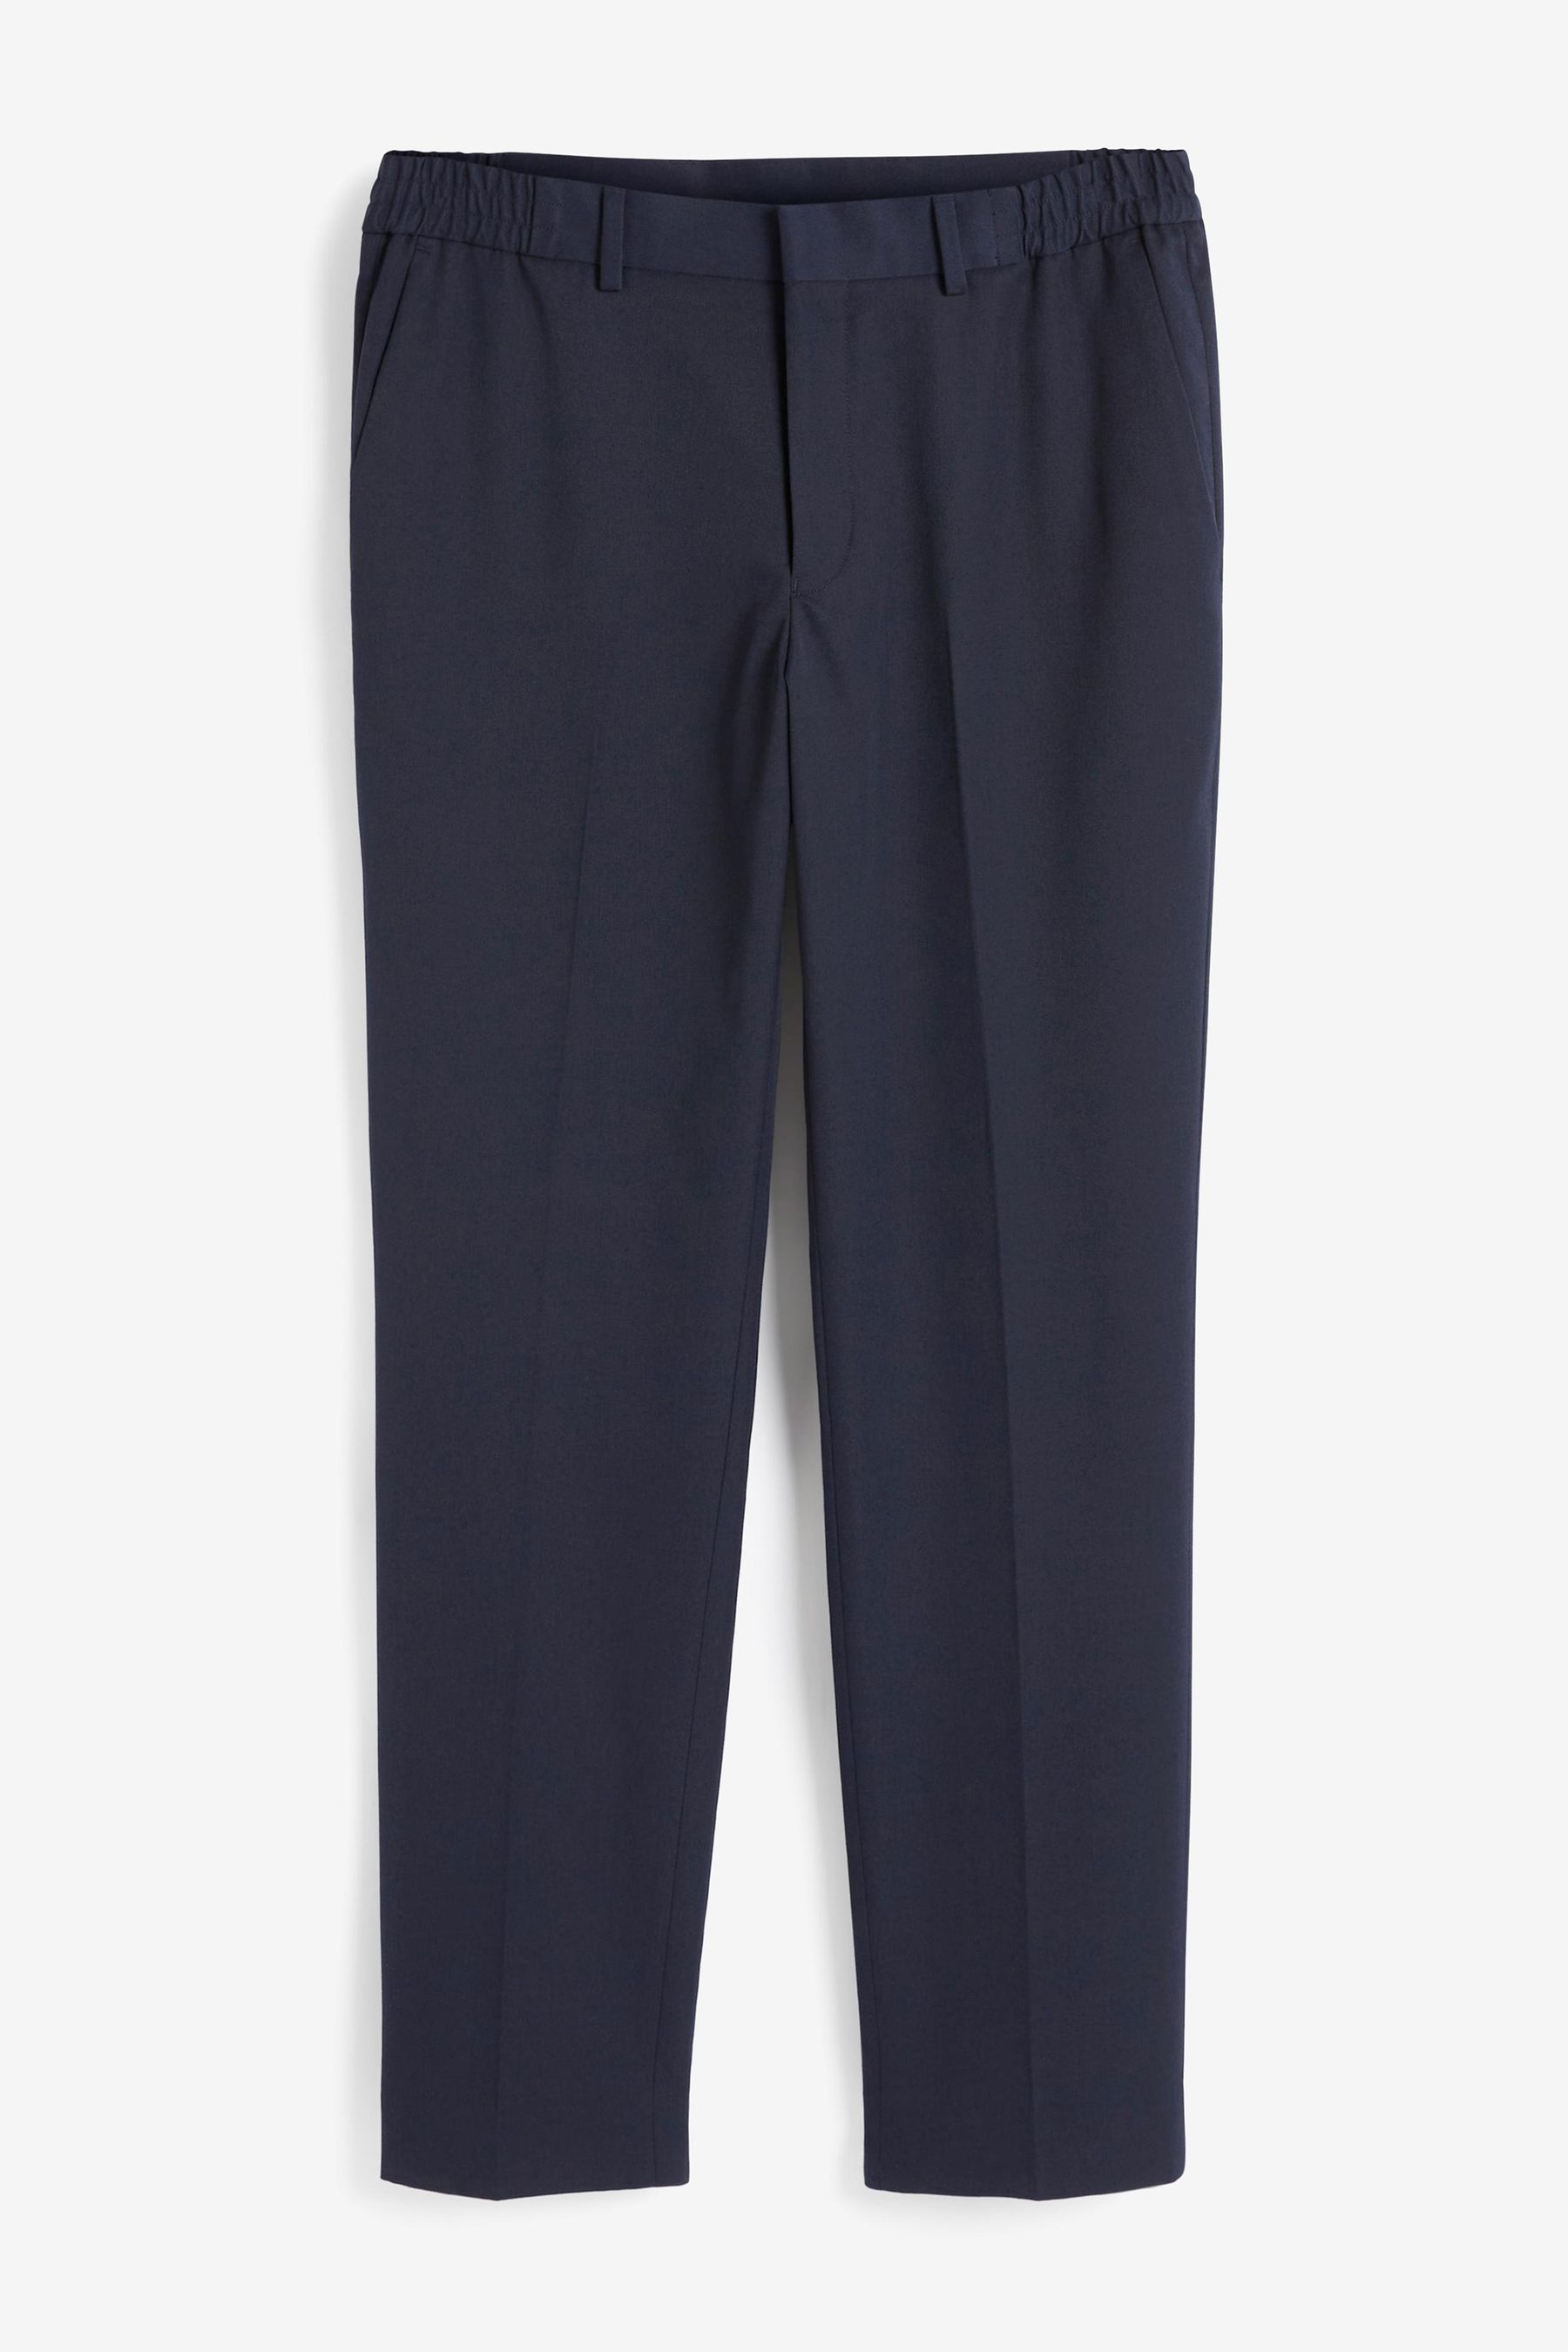 Buy Twill Trousers With Elasticated Waist from Next Belgium